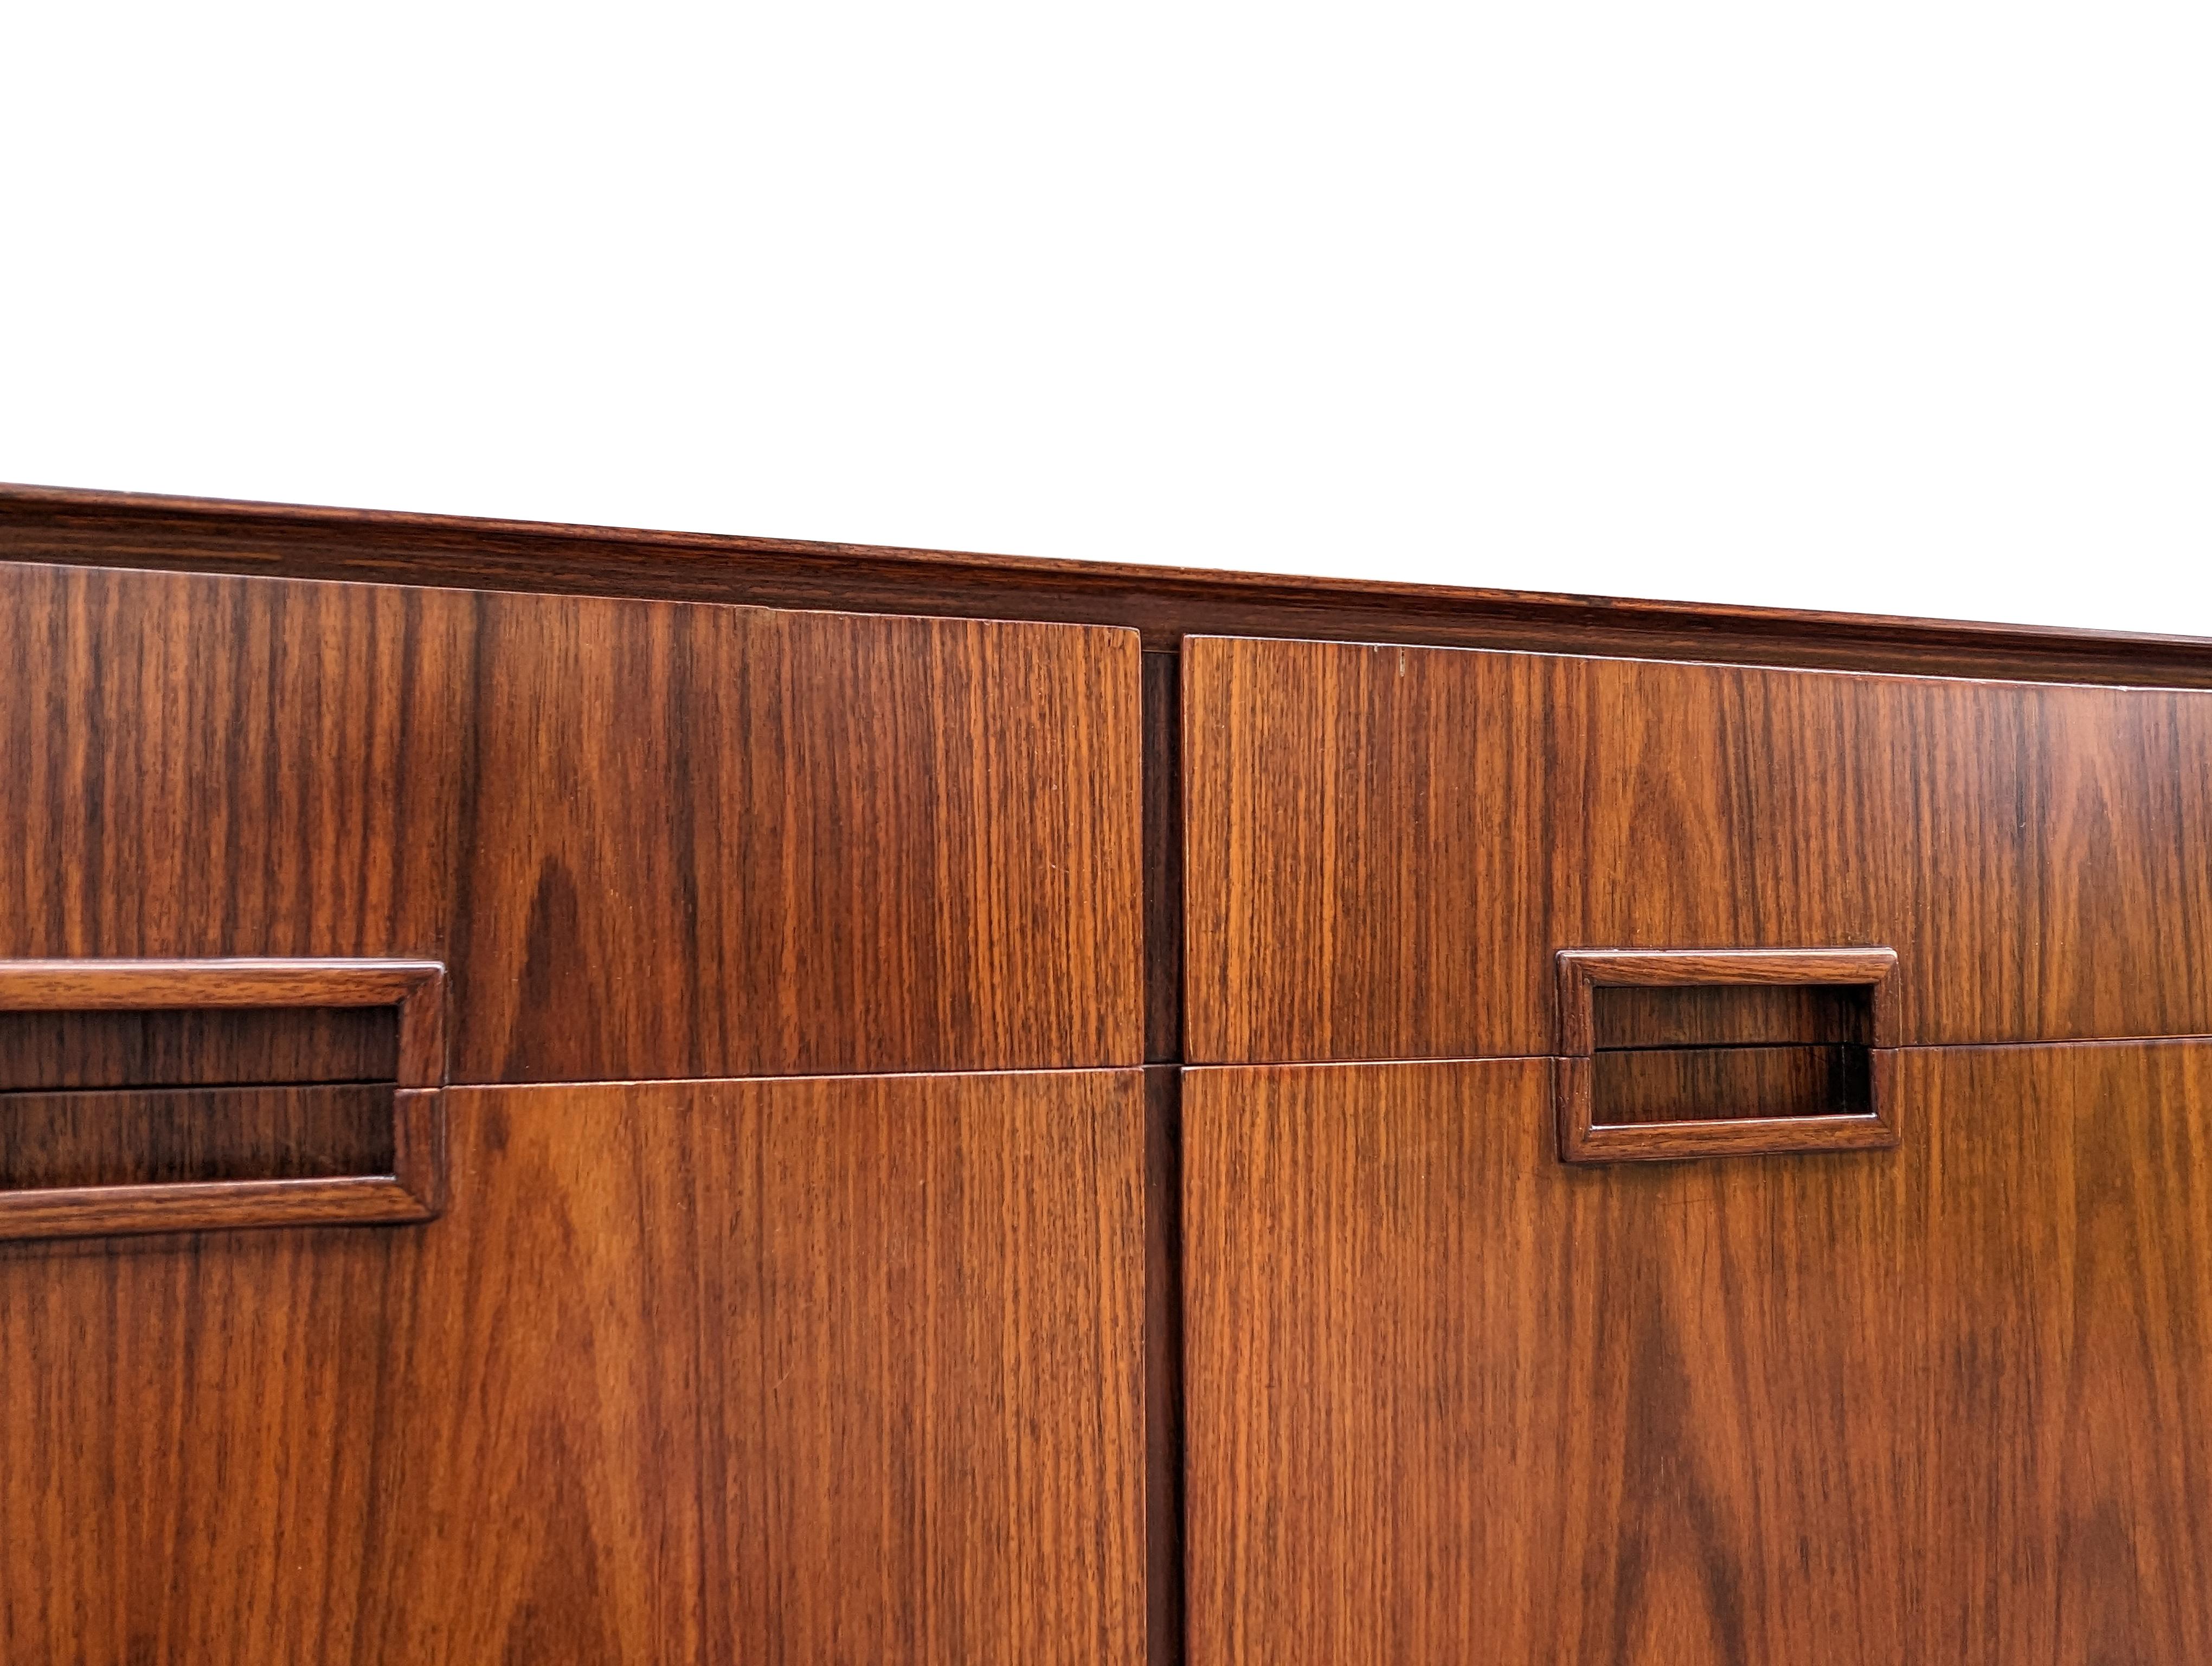 Mid-20th Century Italian Wooden Mid Century Modern Sideboards in the style of Dassi, set of 2 For Sale